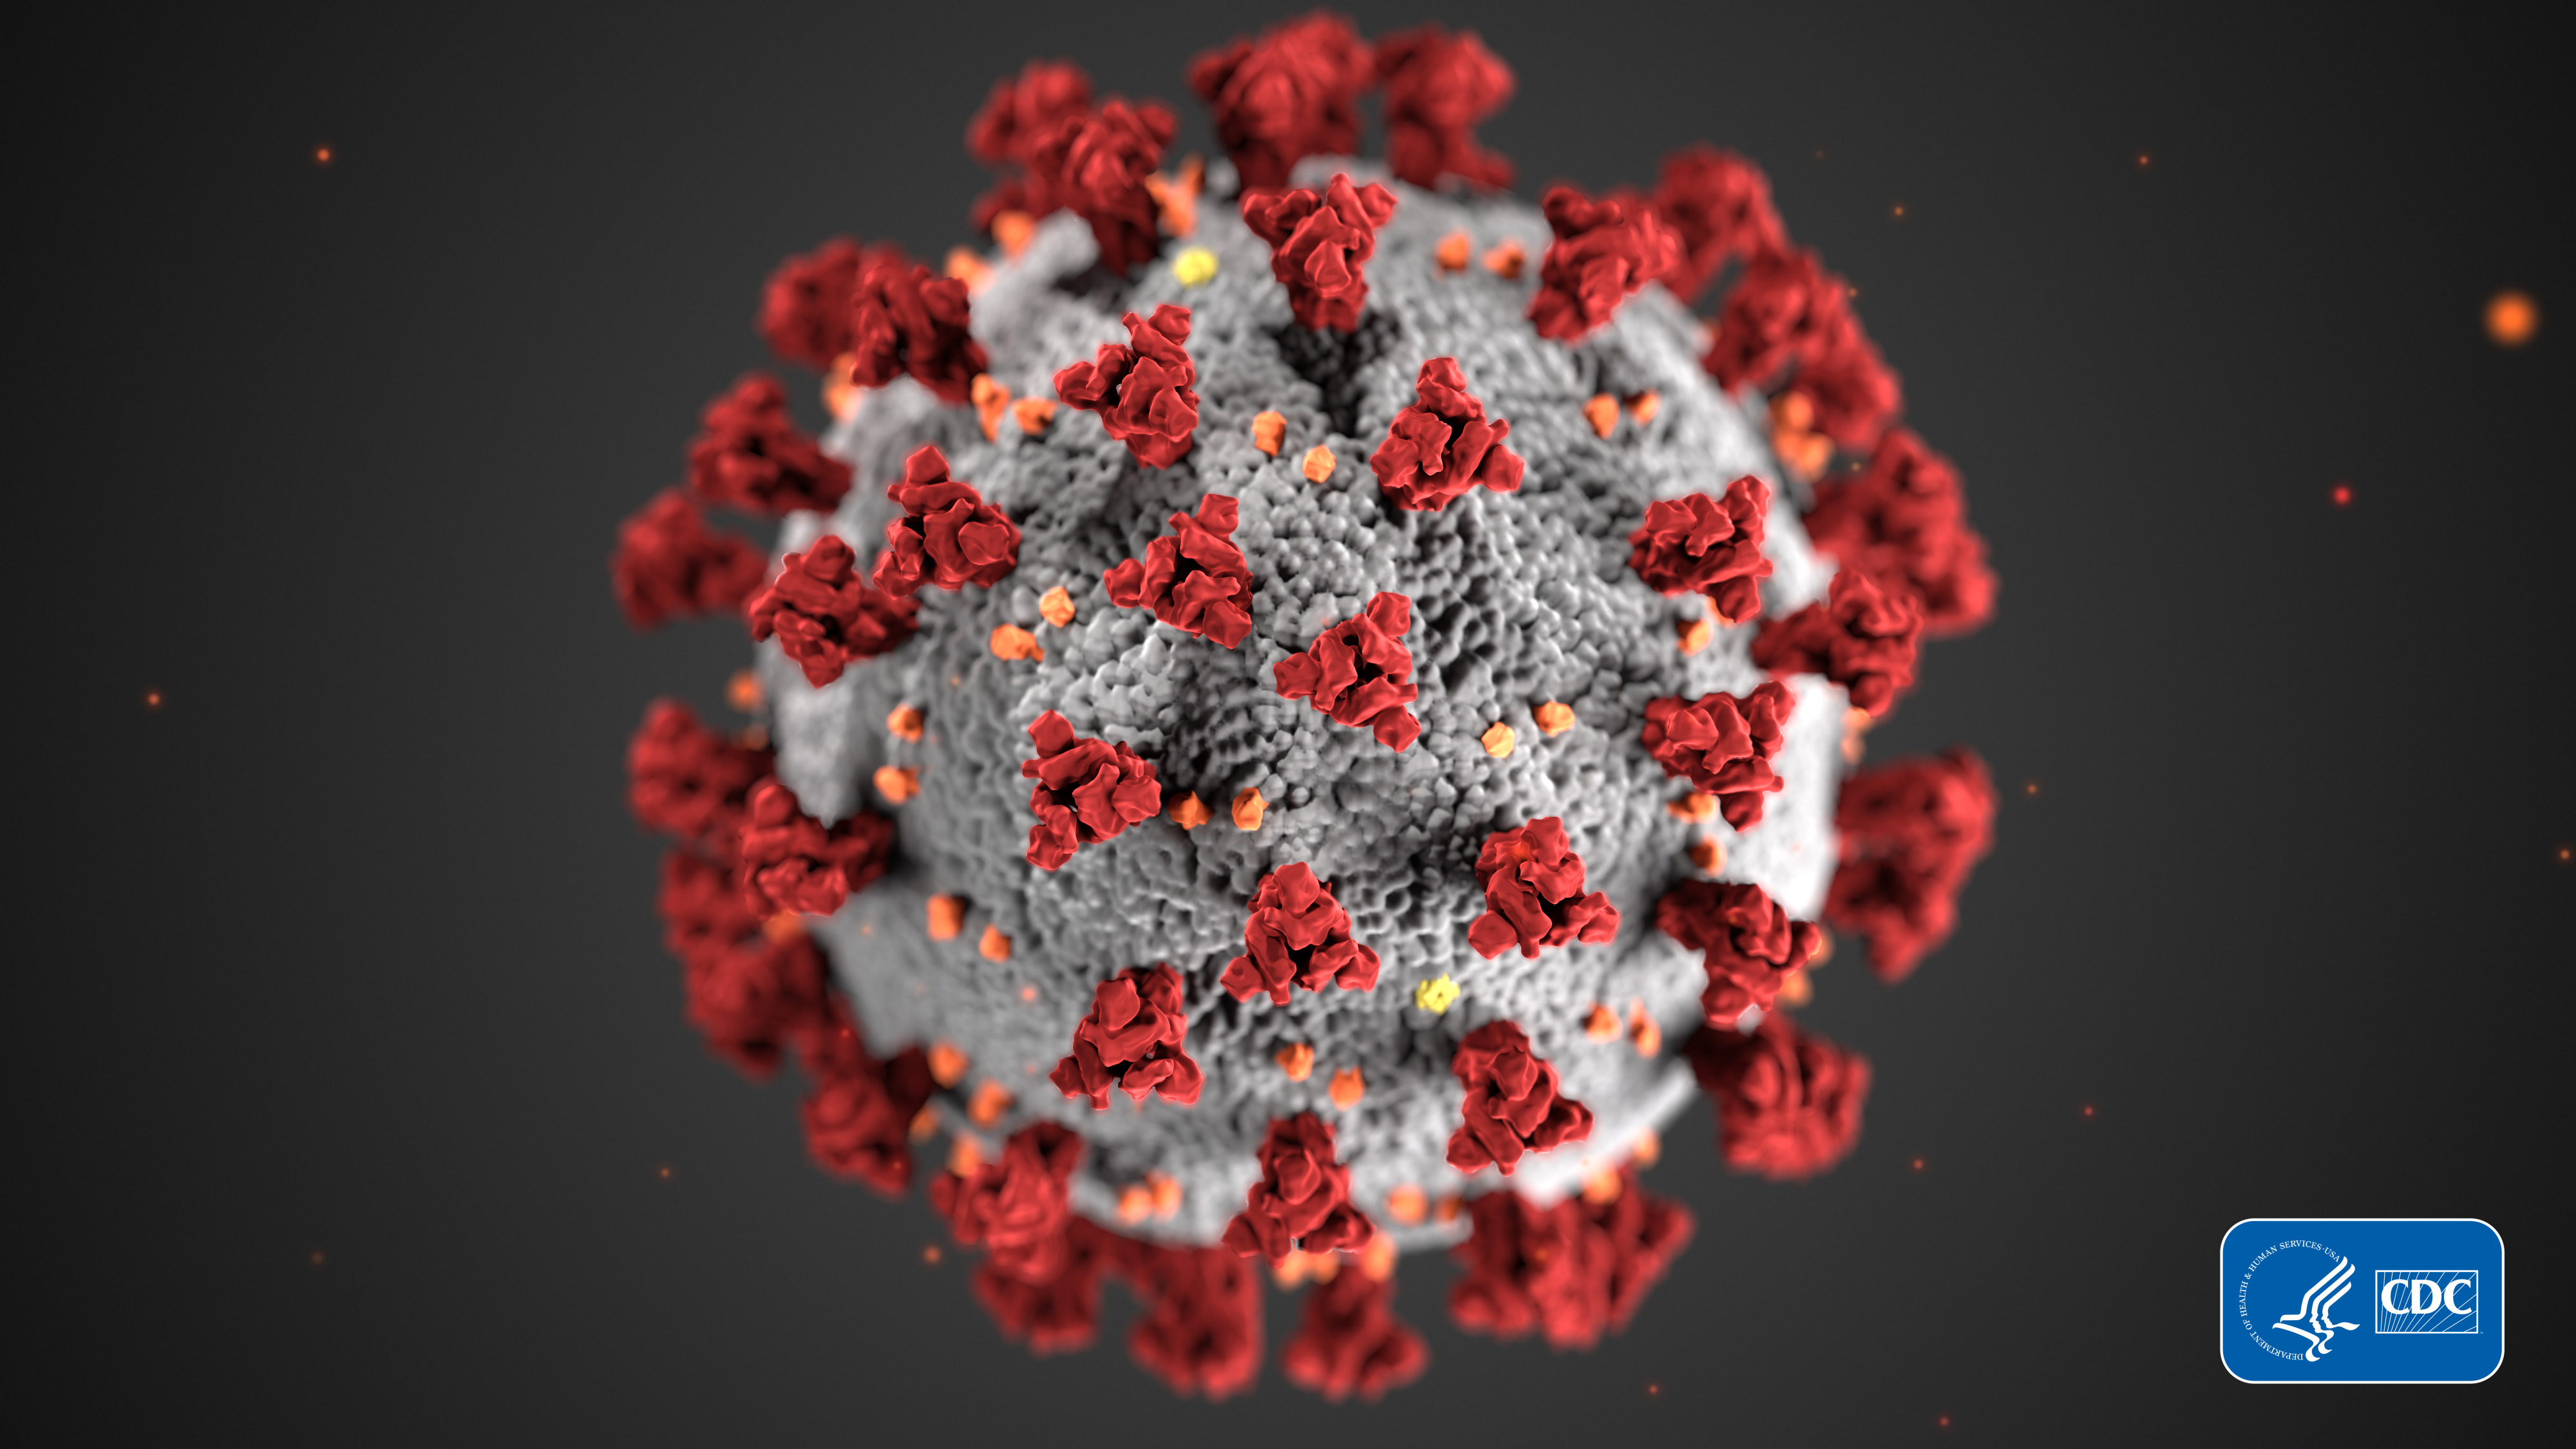 This illustration, created at the Centers for Disease Control and Prevention (CDC), reveals ultrastructural morphology exhibited by coronaviruses. Note the spikes that adorn the outer surface of the virus, which impart the look of a corona surrounding the virion, when viewed electron microscopically.